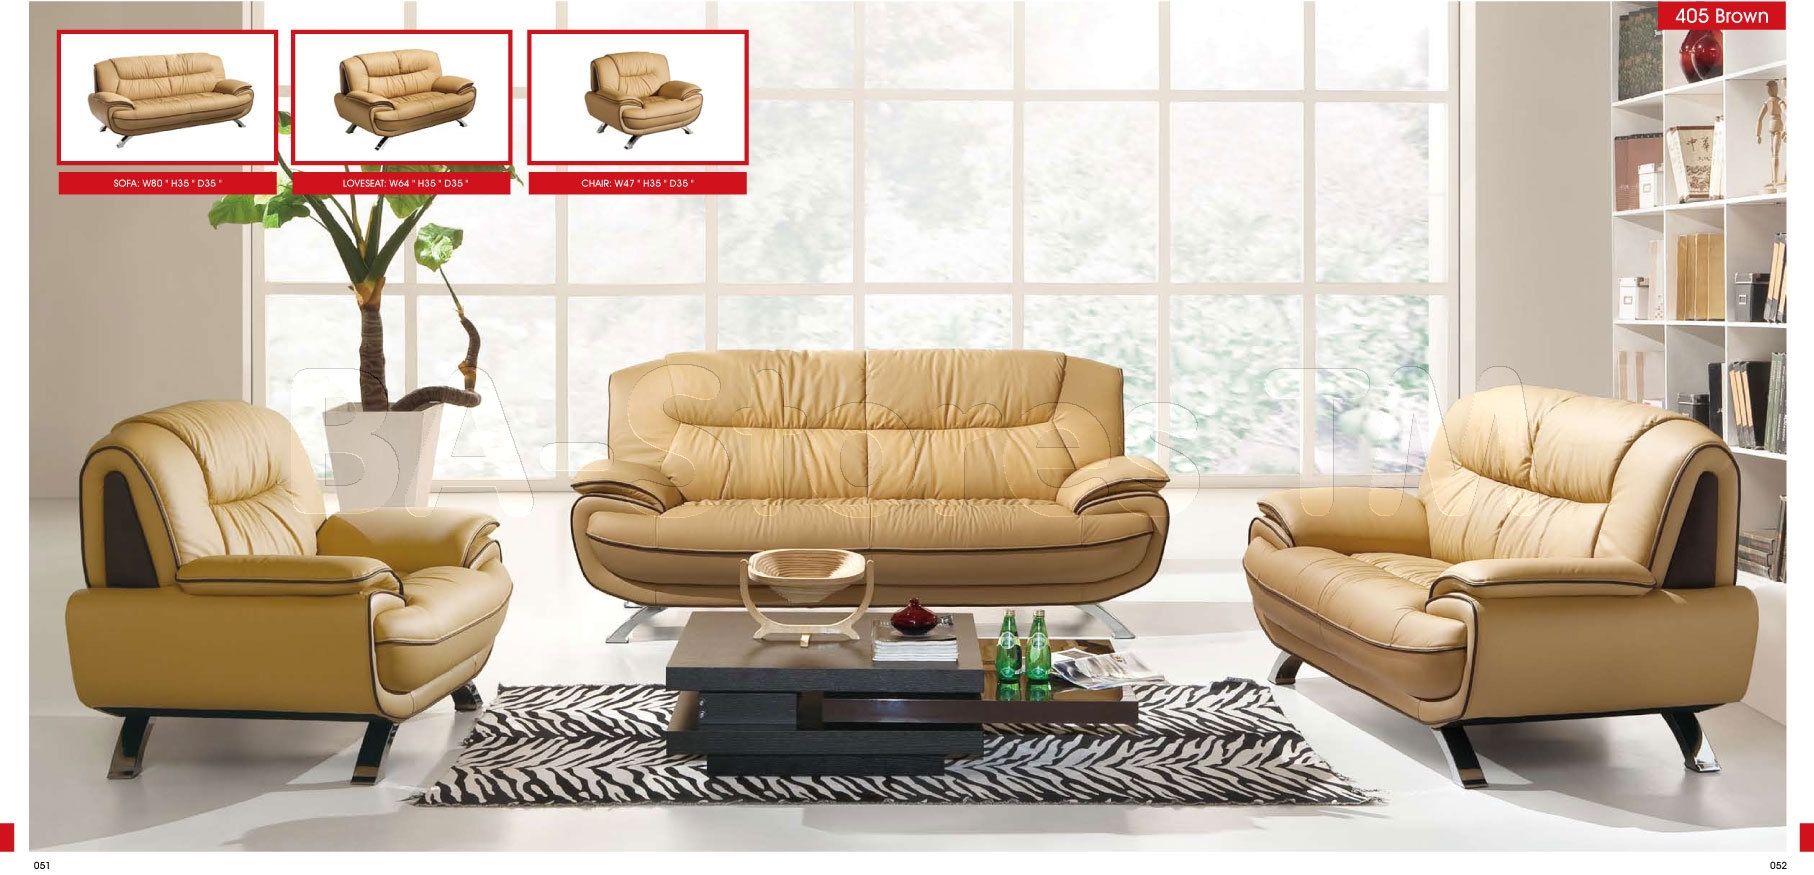 Sofa And Chair Sets 405 Modern Living Room Set Brown Sofa Loveseat With Regard To Living Room Sofa And Chair Sets (View 8 of 15)